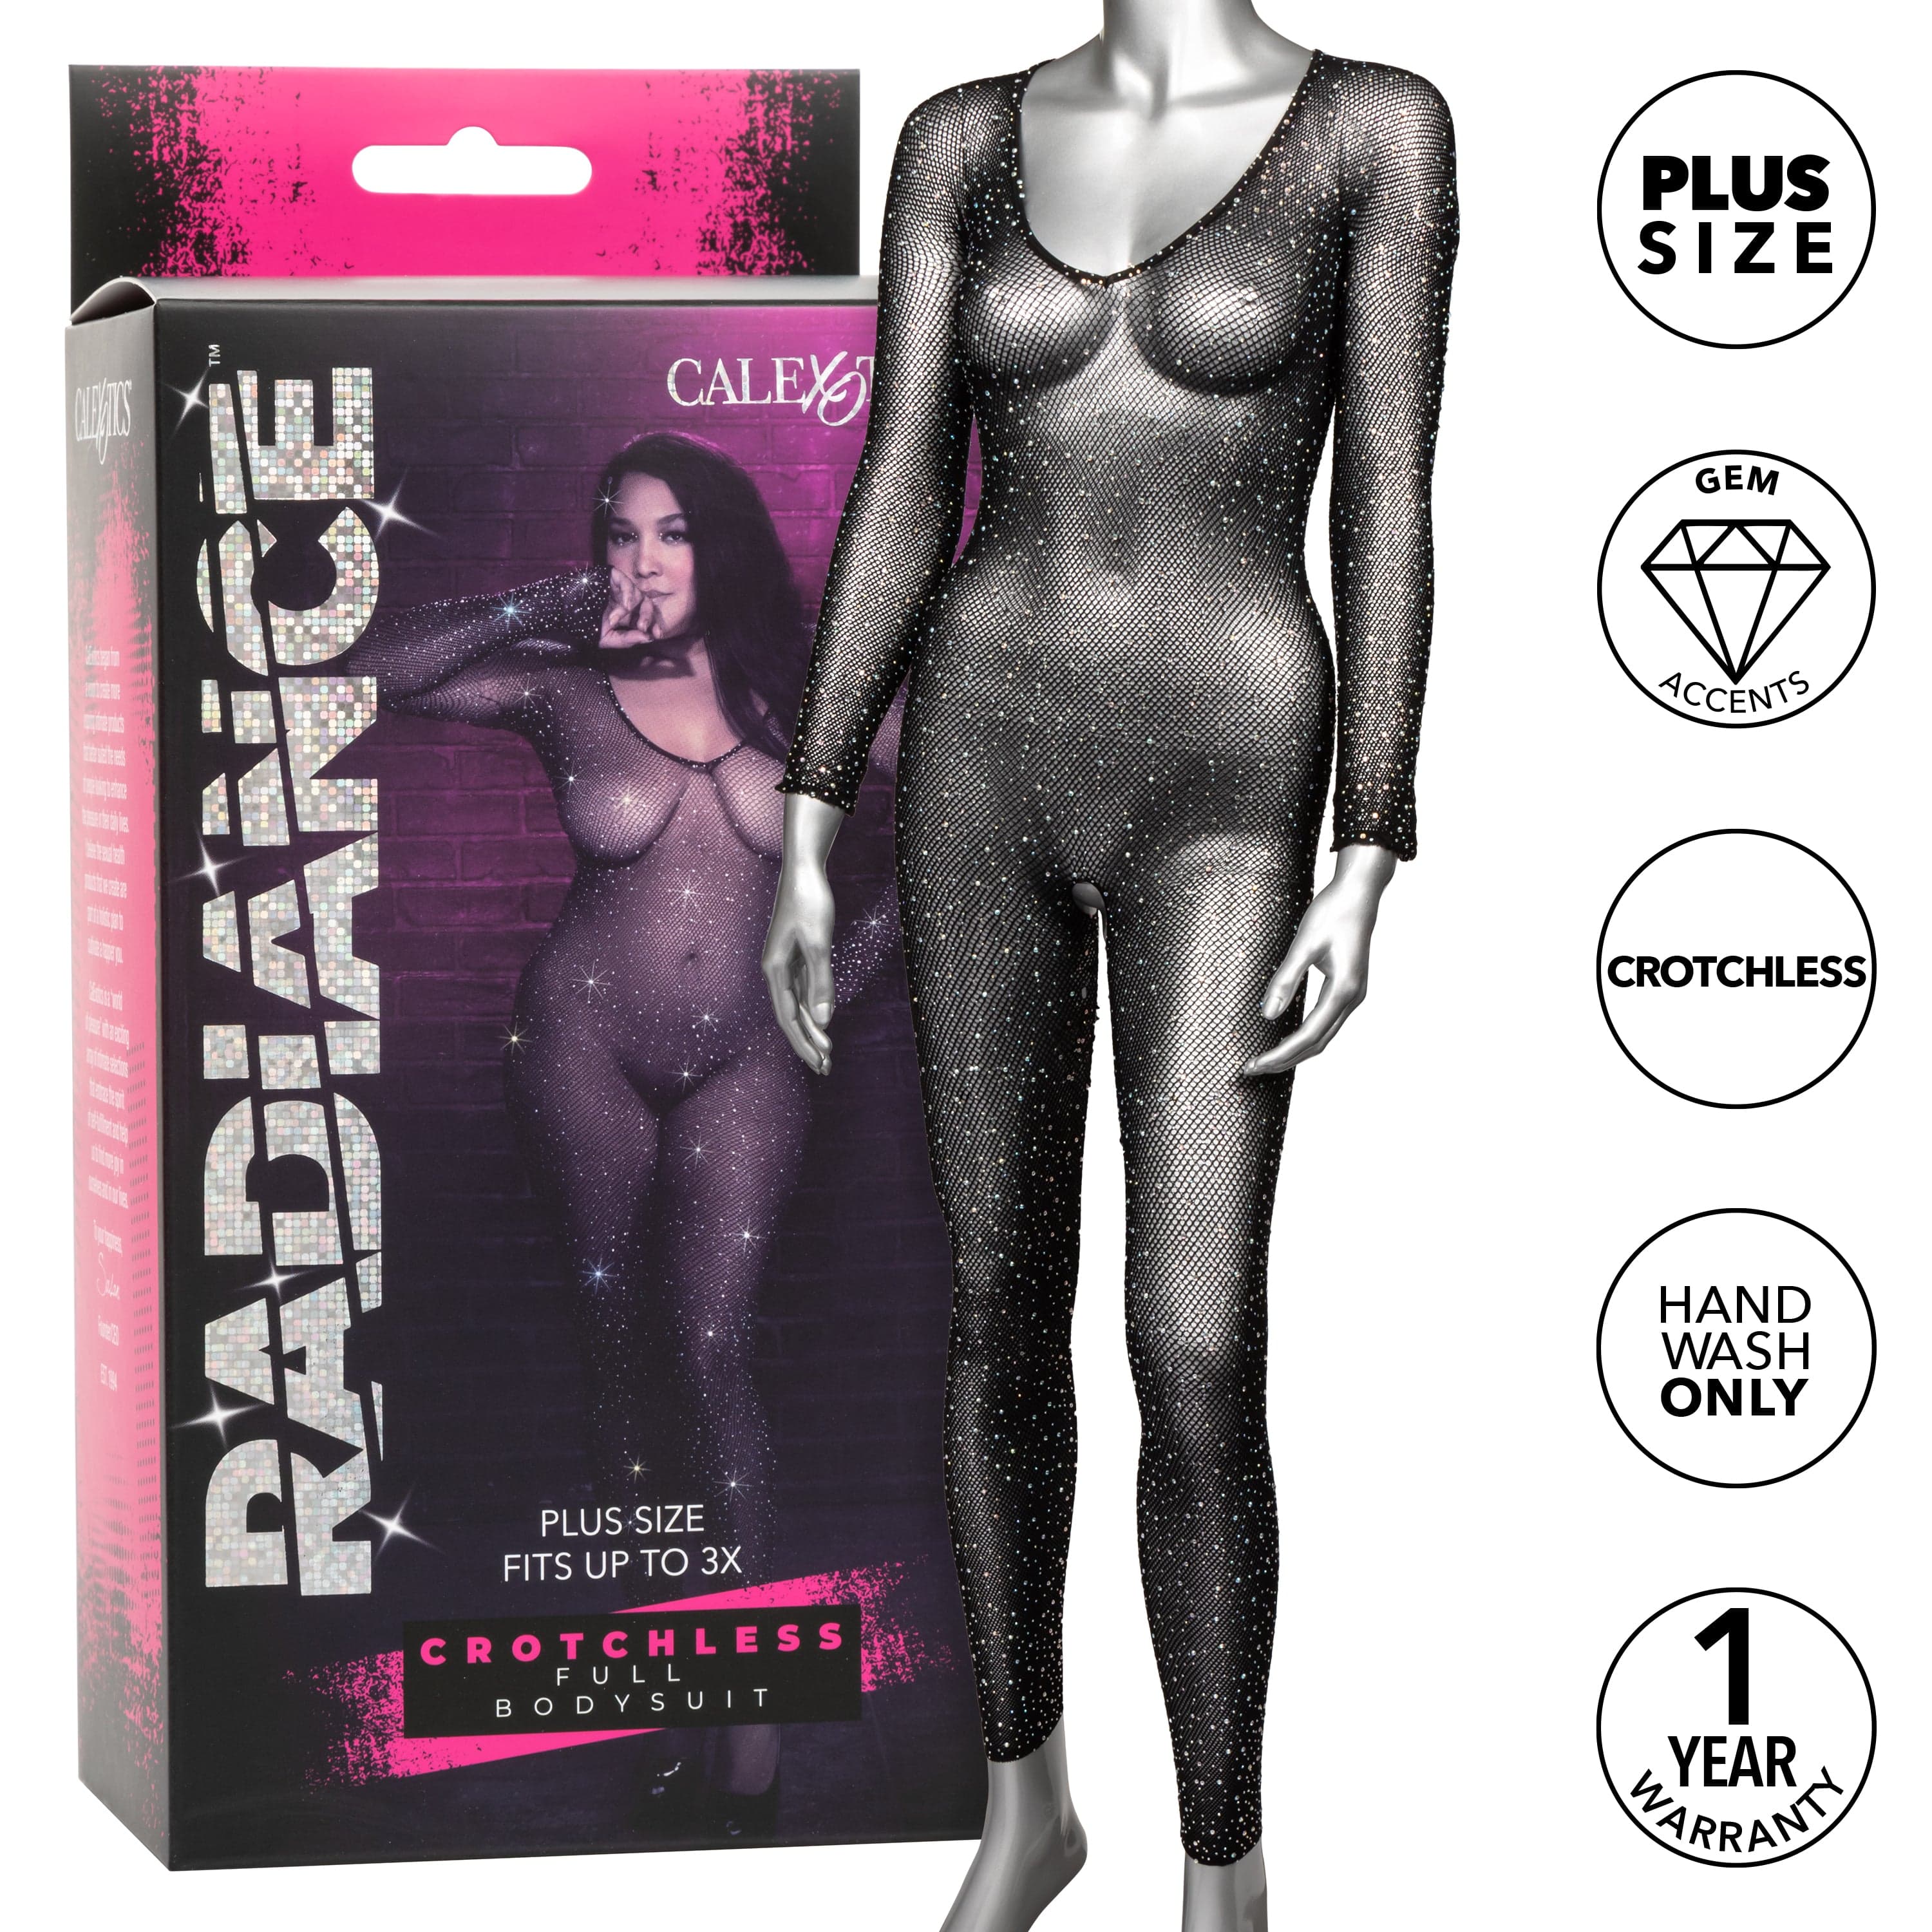 PLUS SIZE CROTCHLESS FULL BODY SUIT